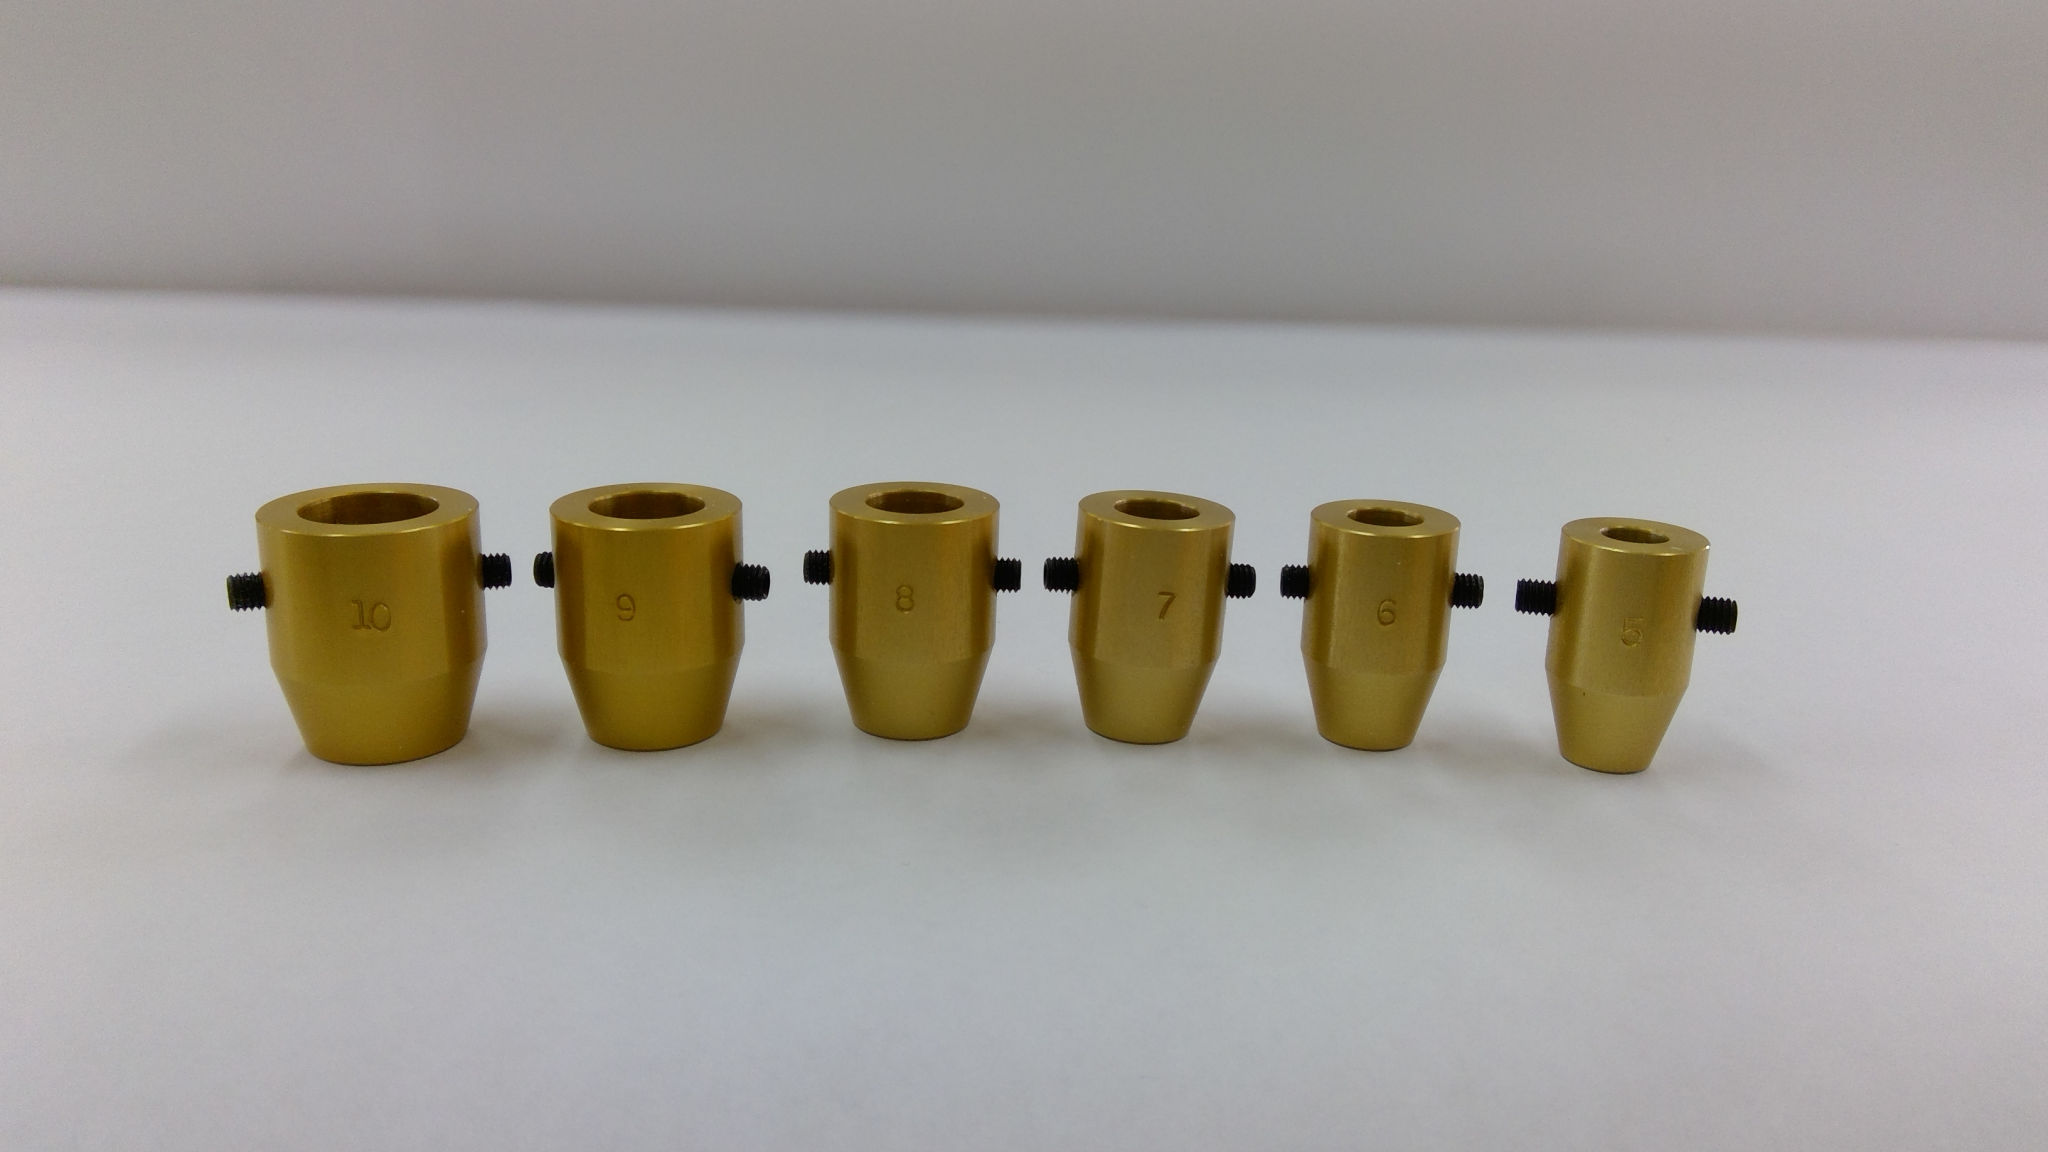 Chair Maker's Drill Stops - available in sets or individually